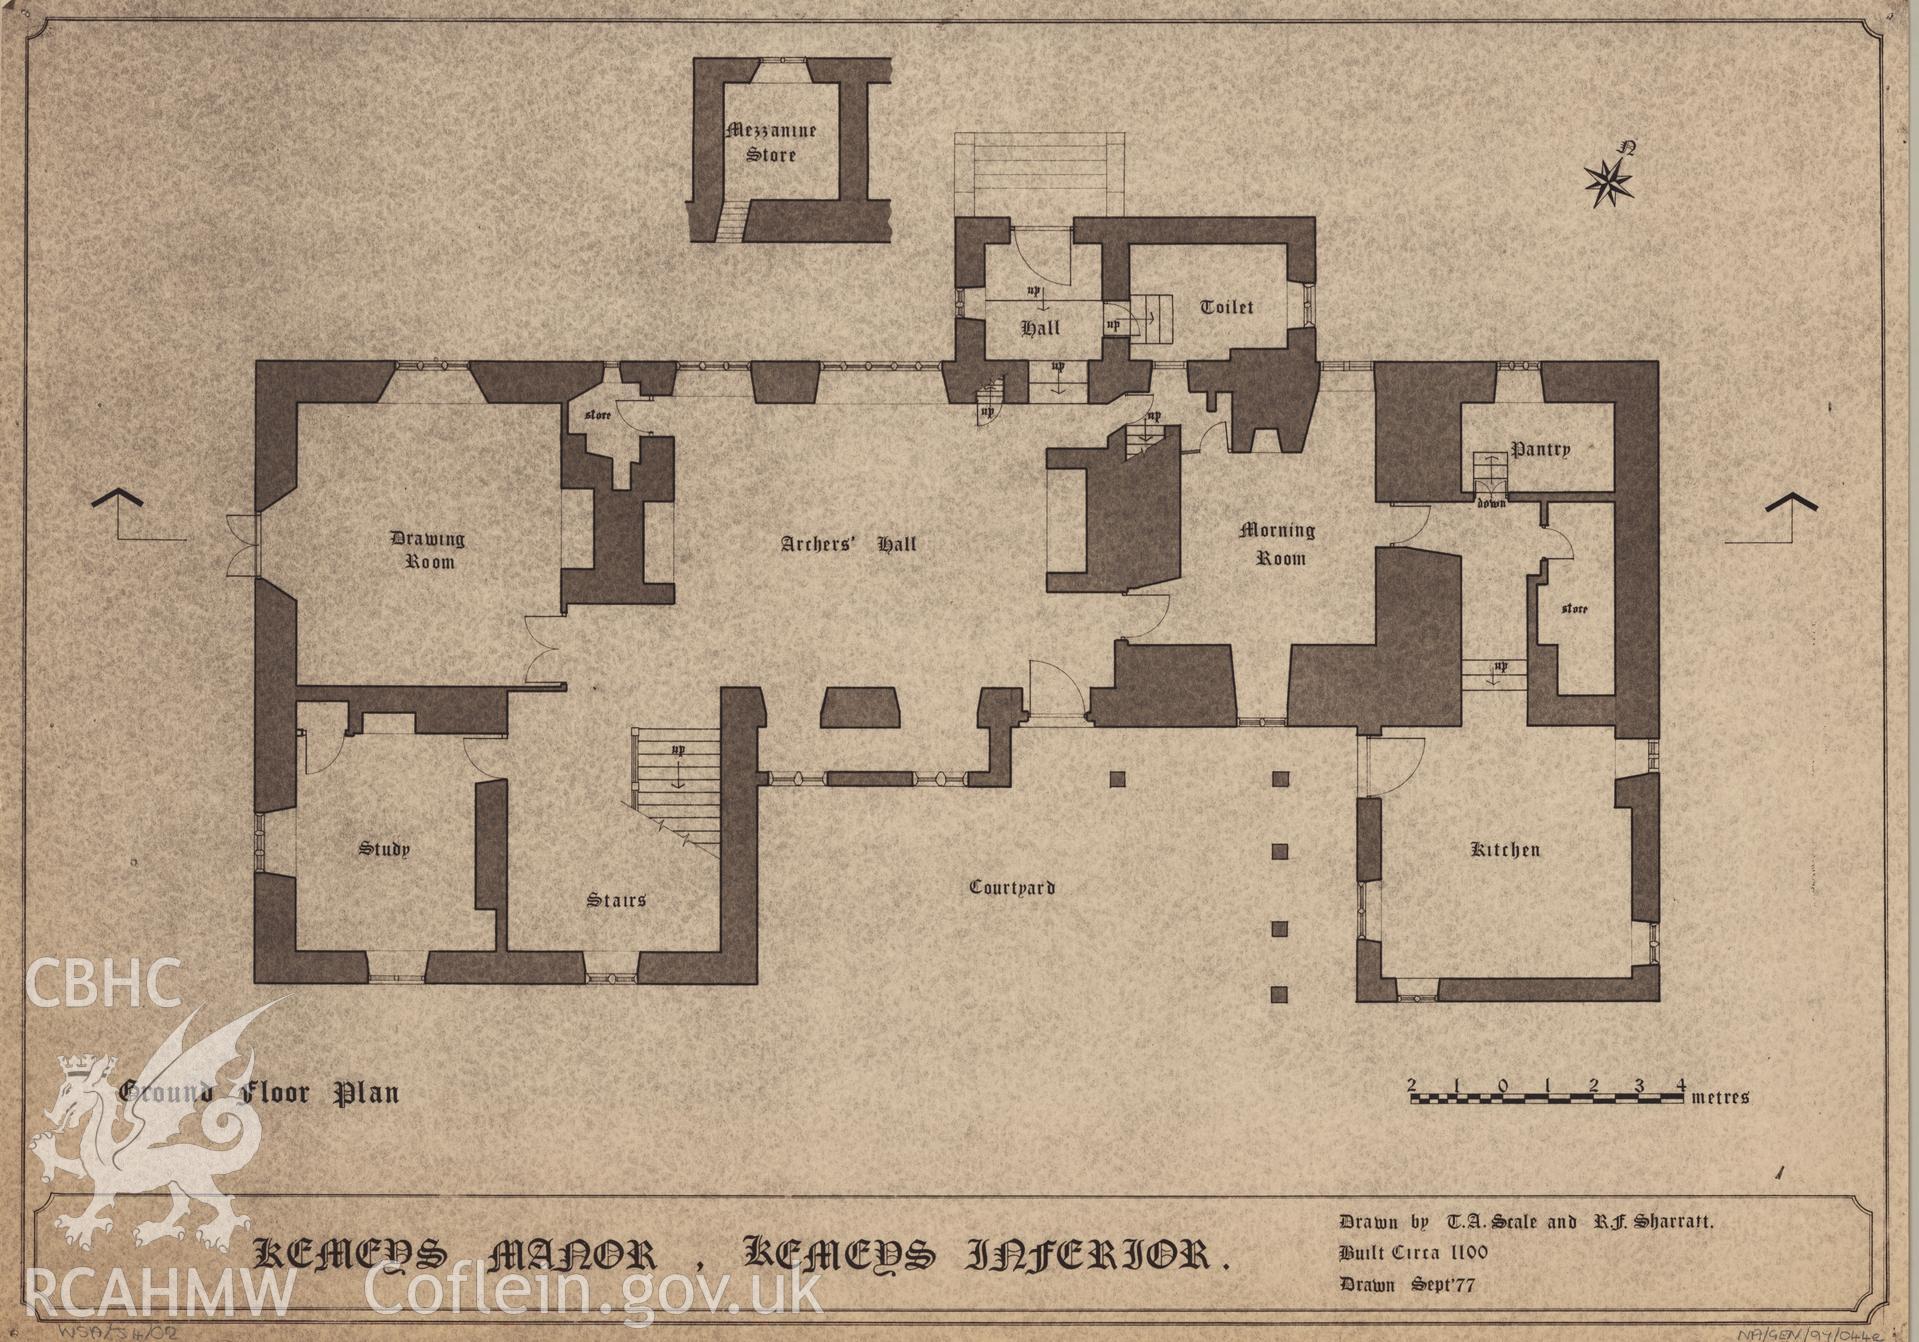 Measured drawing showing ground floor plan of Kemey's Manor, Kemeys Inferior, produced by T.A. Scale and R.F. Sharratt, September 1977.